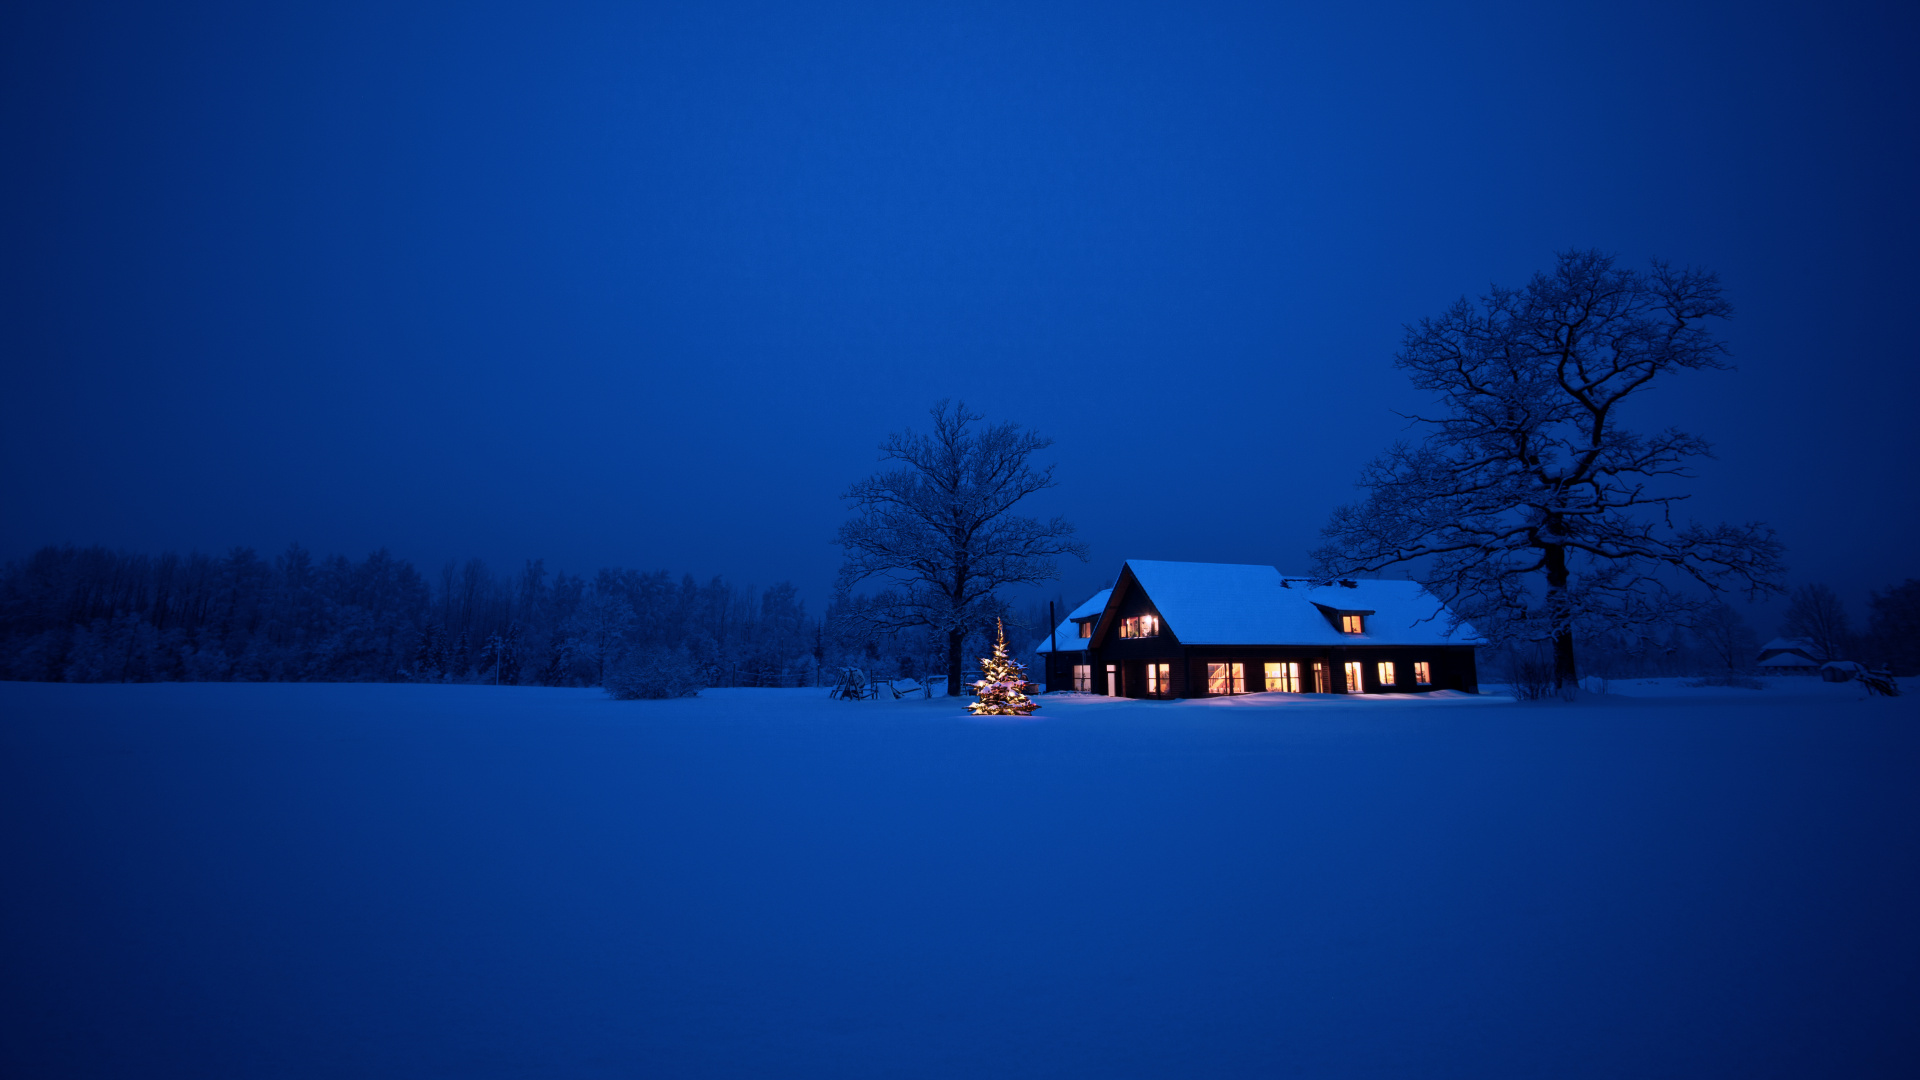 Brown Wooden House on Snow Covered Ground During Night Time. Wallpaper in 1920x1080 Resolution